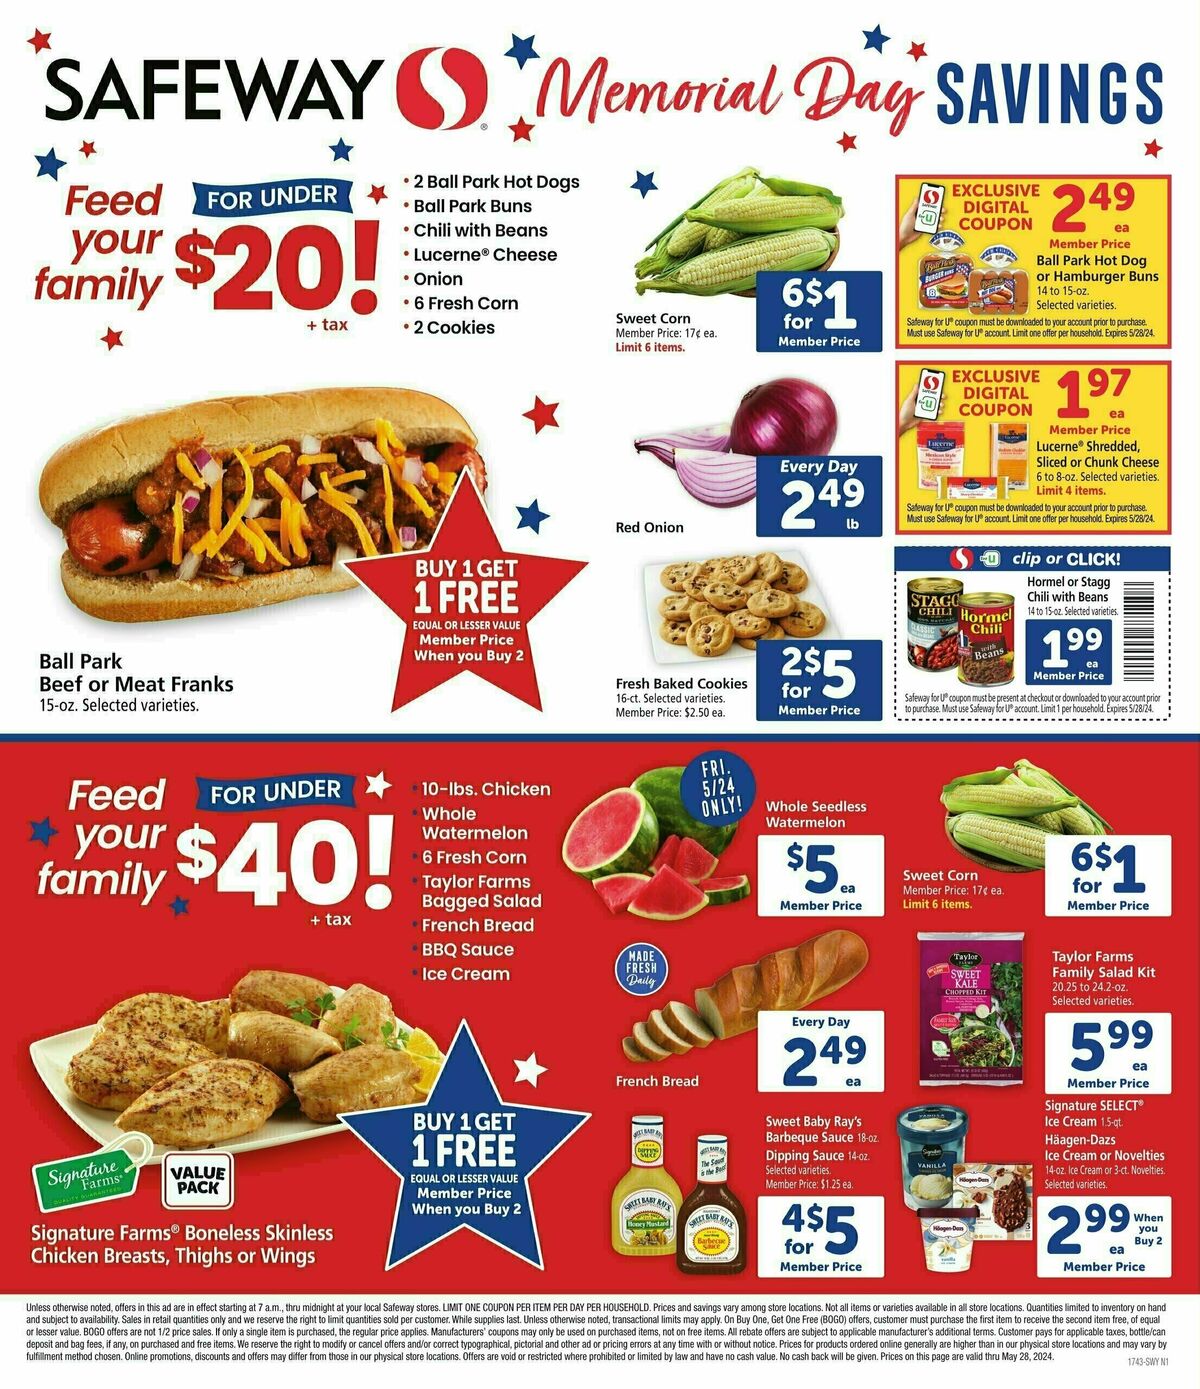 Safeway Specialty Publication Weekly Ad from May 22